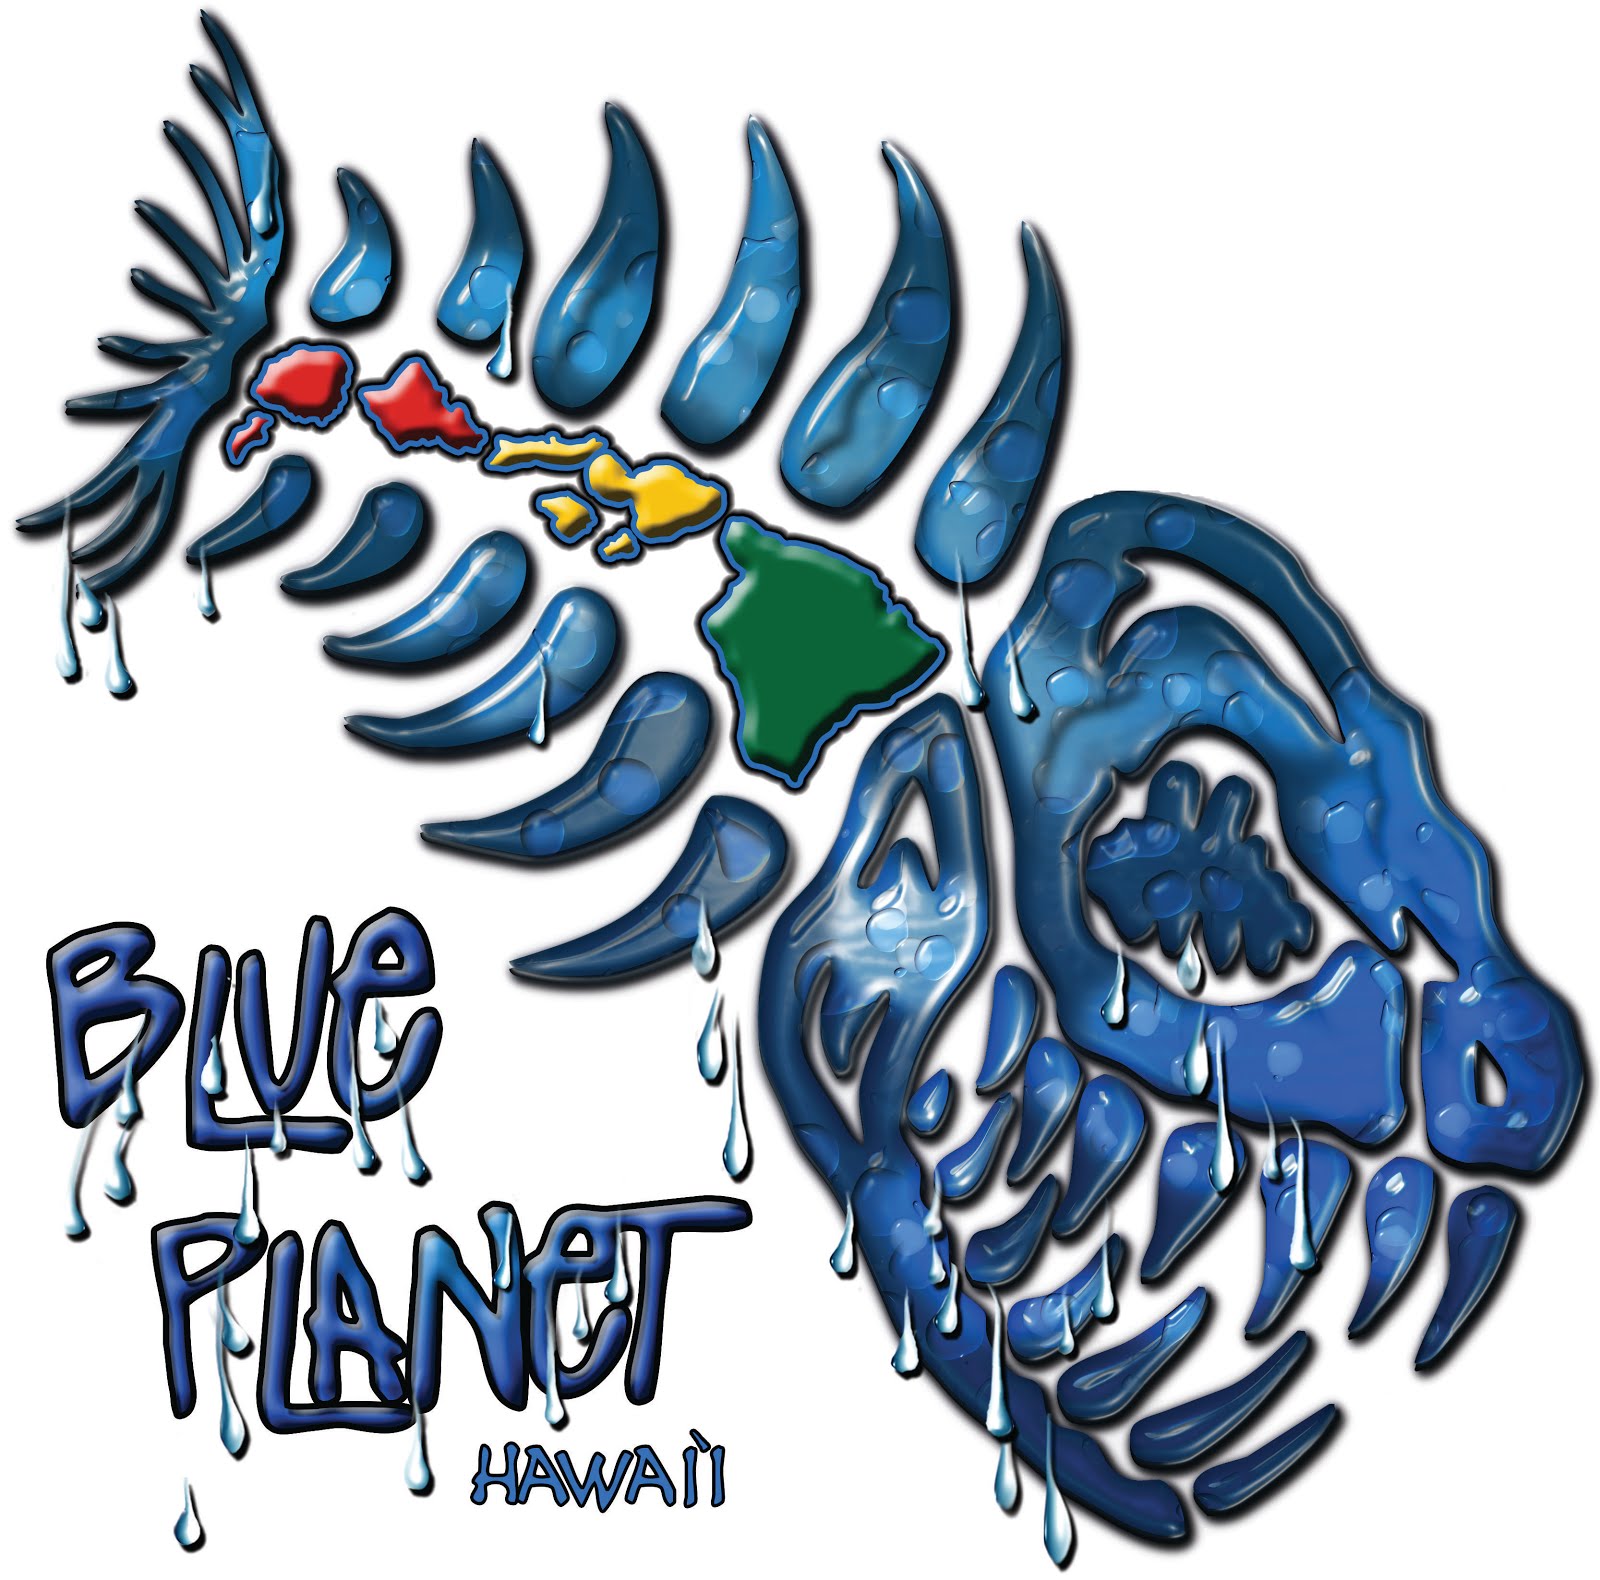 This Blog is brought to you by Blue Planet Surf